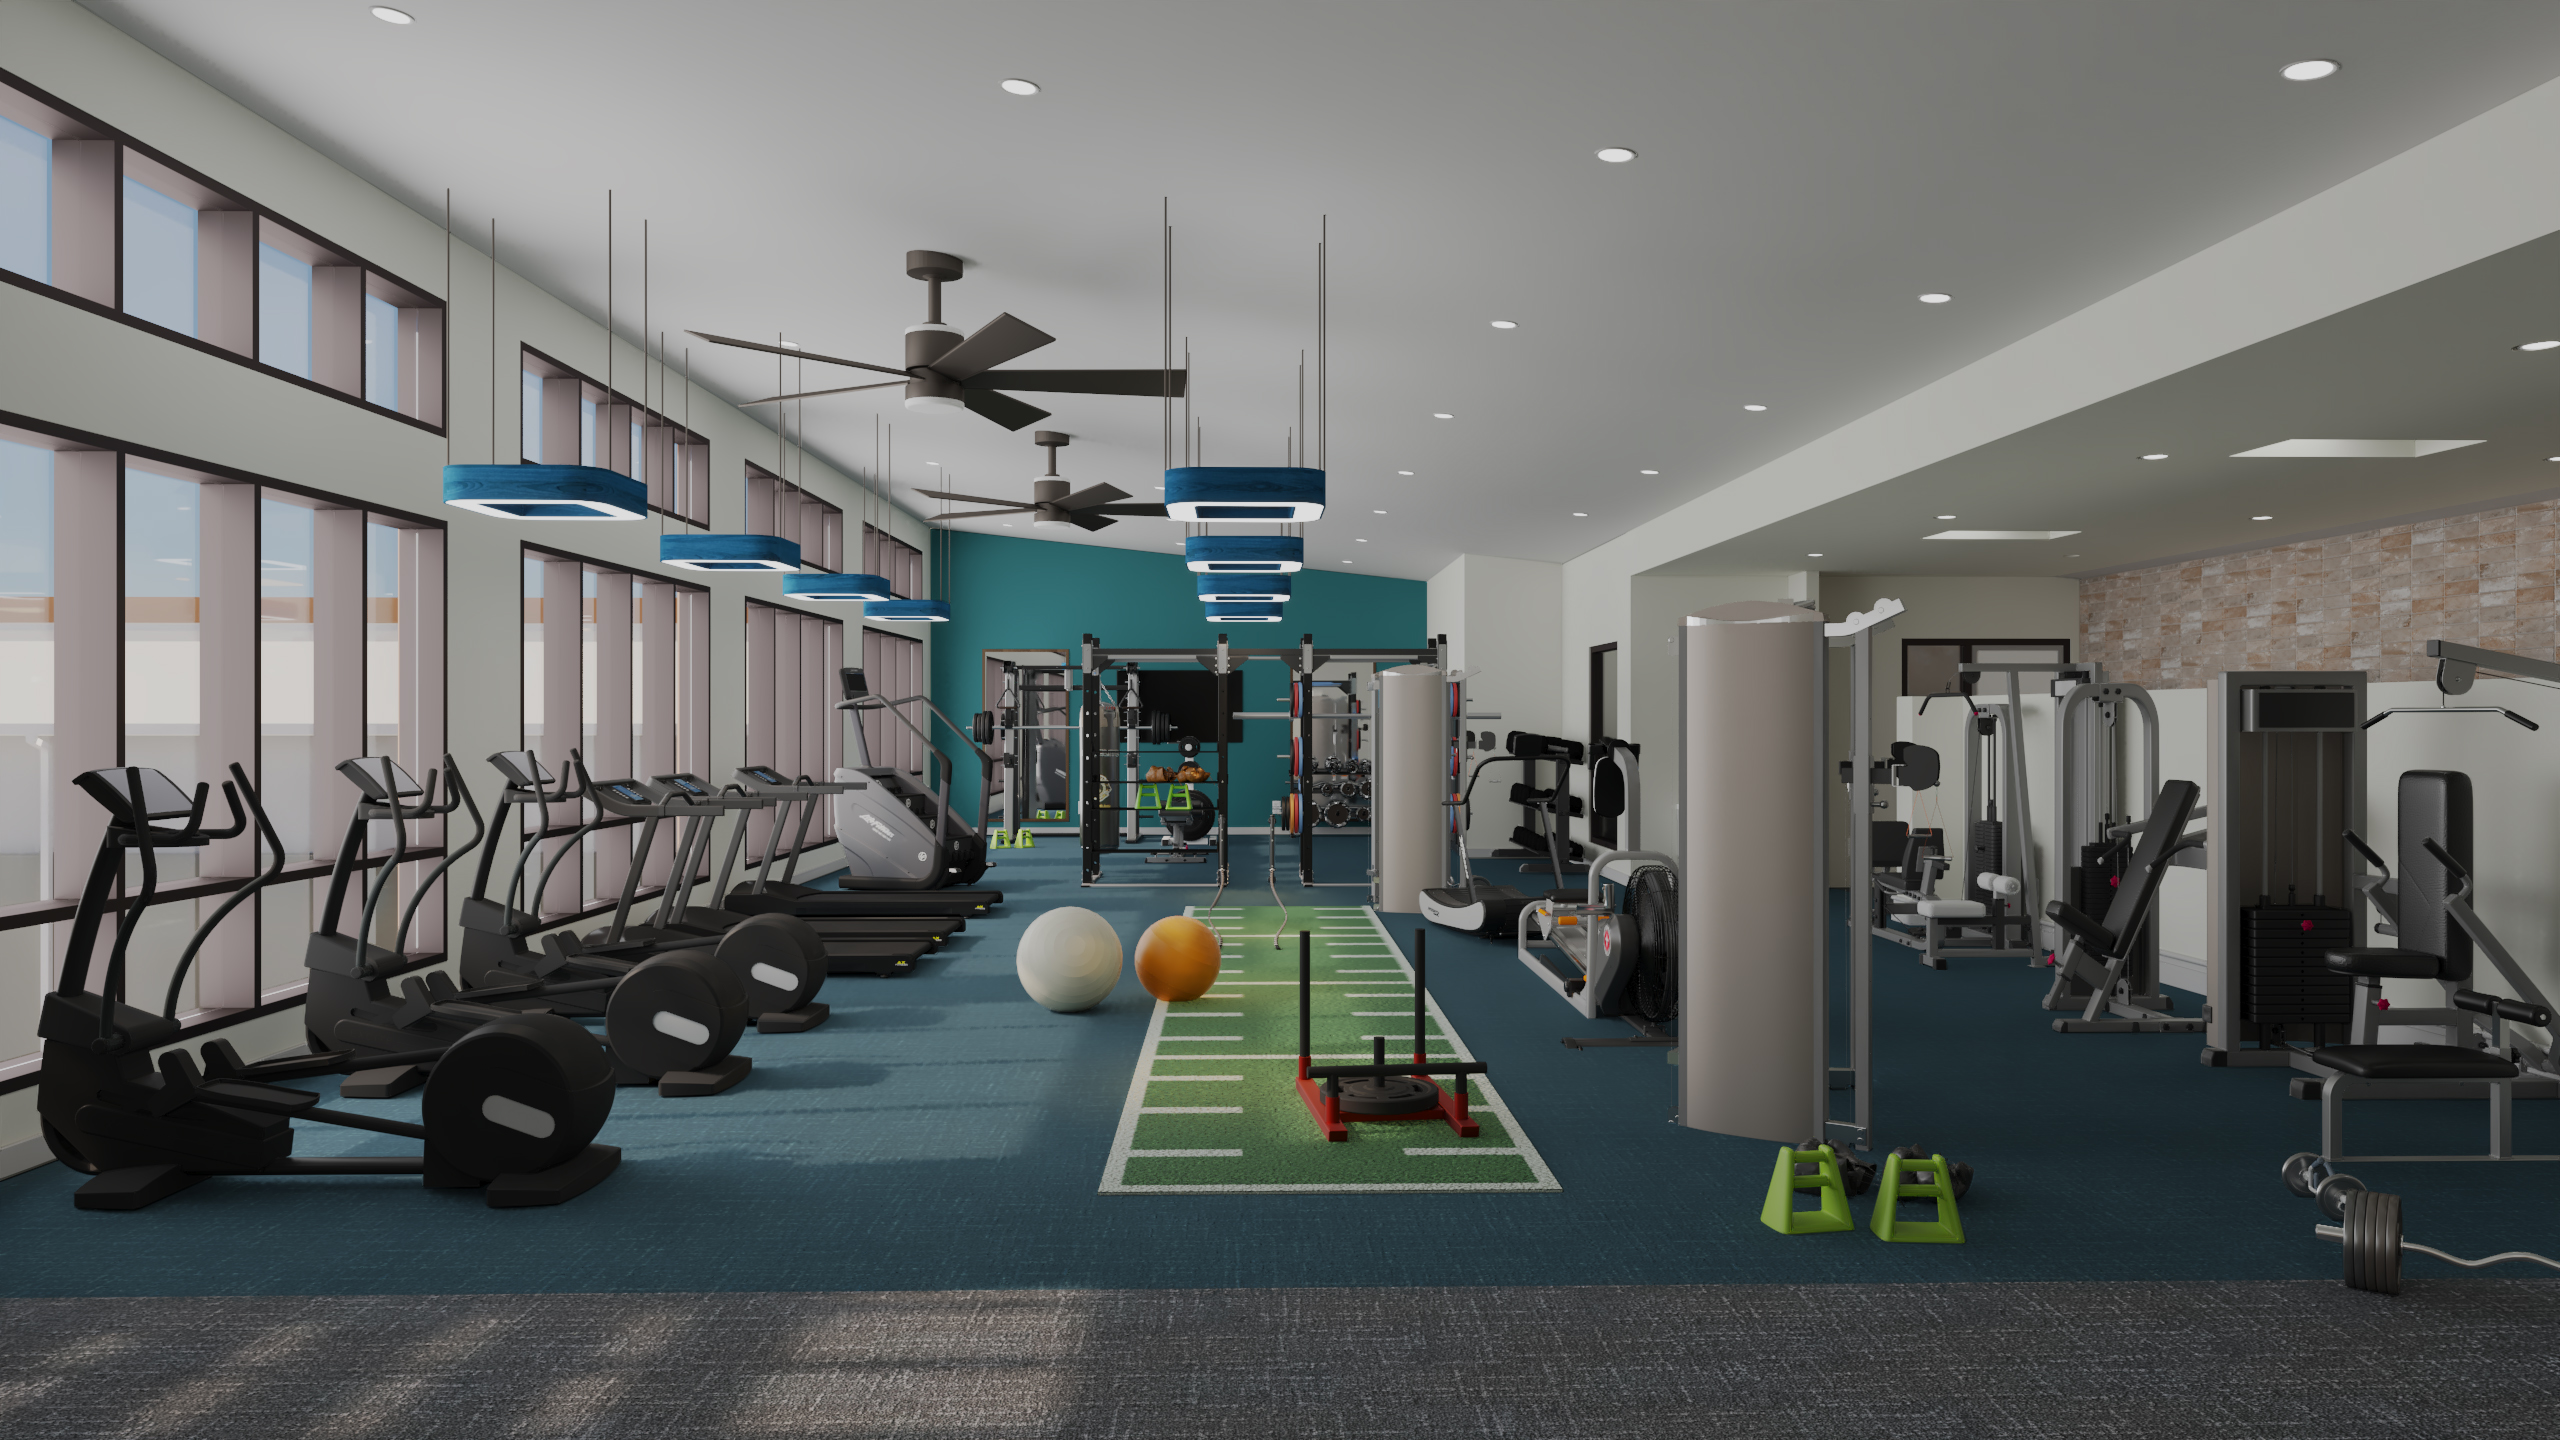 Rooftop Fitness center render in gainesville fl student apartments